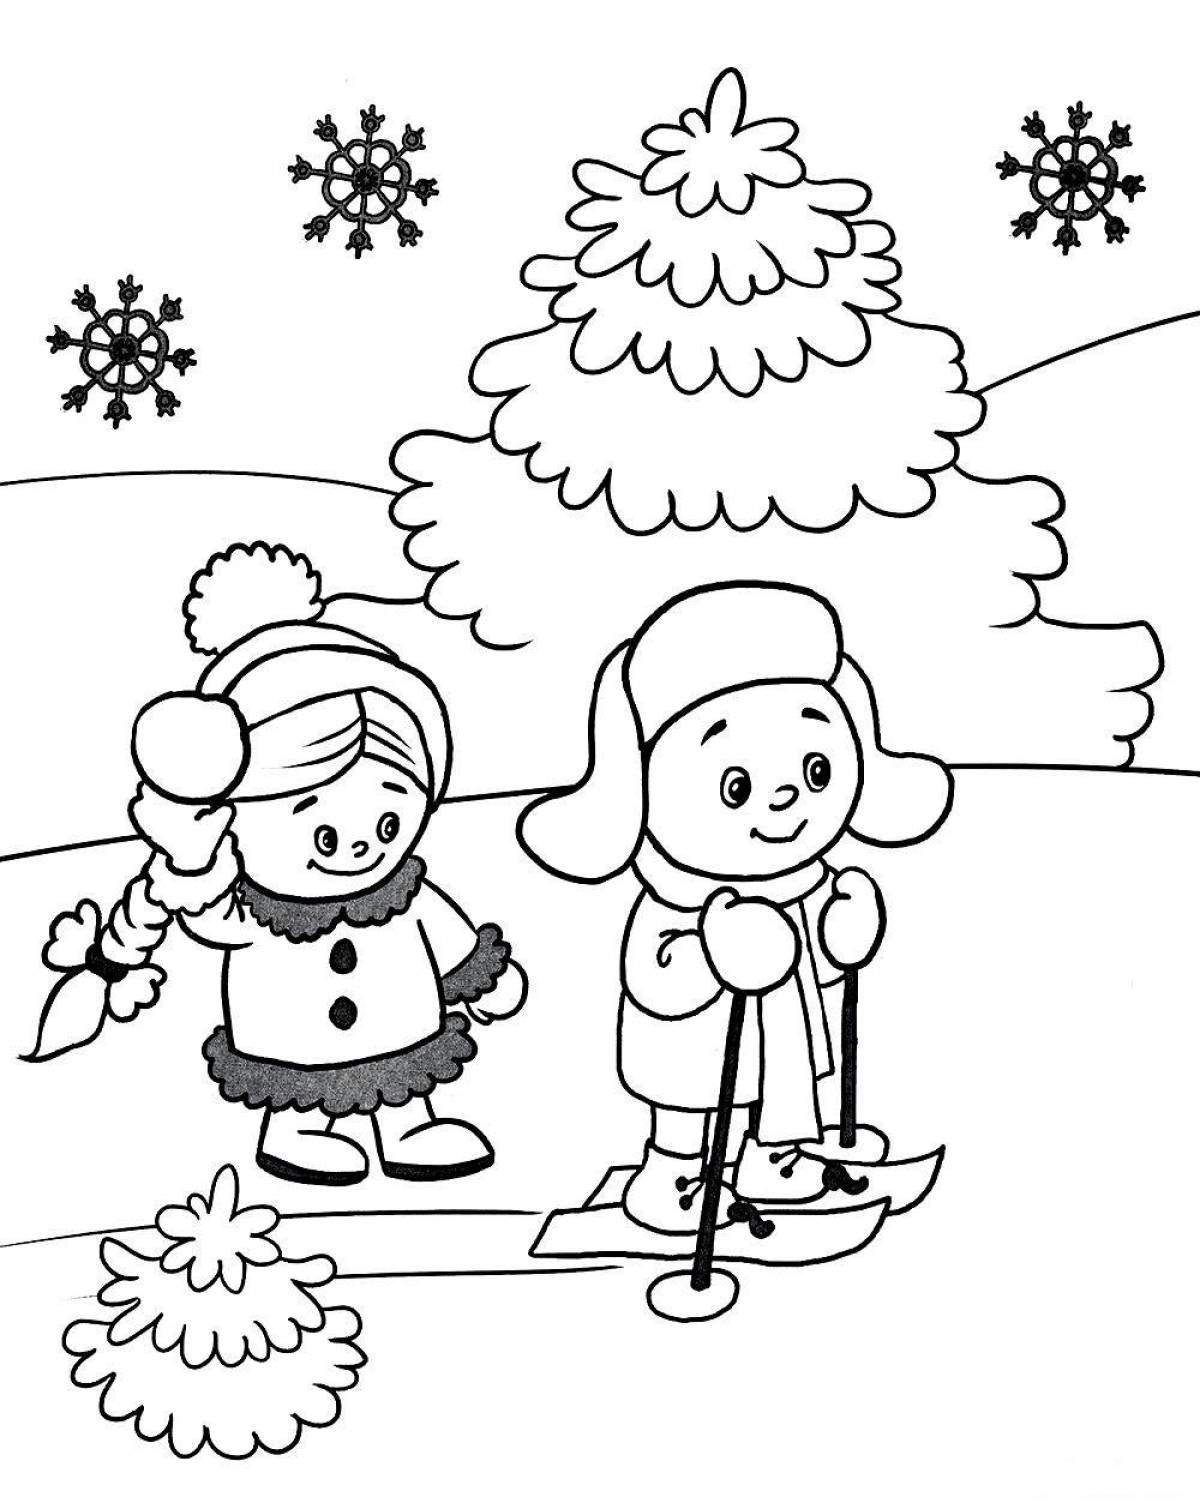 Fantastic winter coloring book for kids 6-7 years old